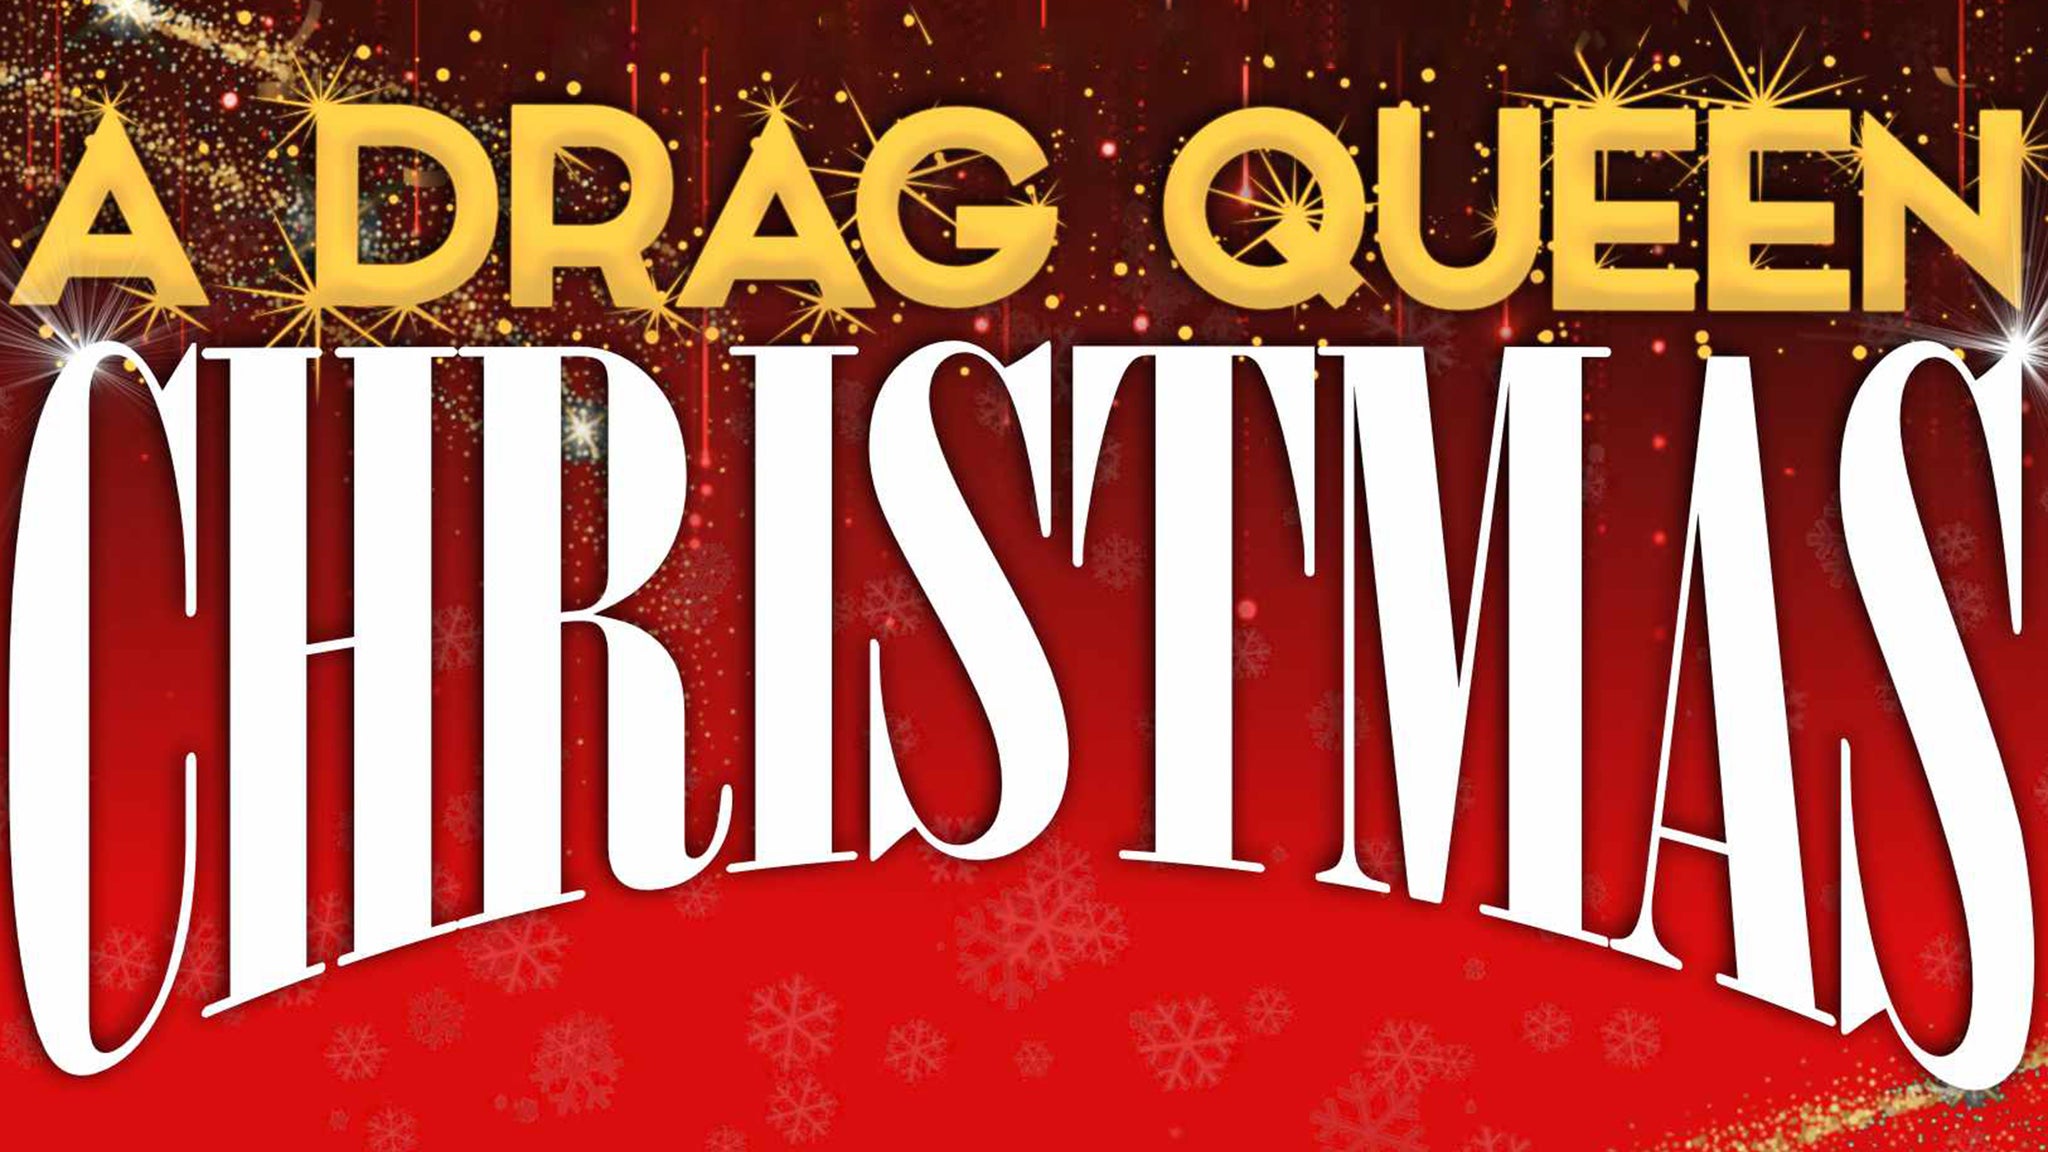 A Drag Queen Christmas 18+ Id Required